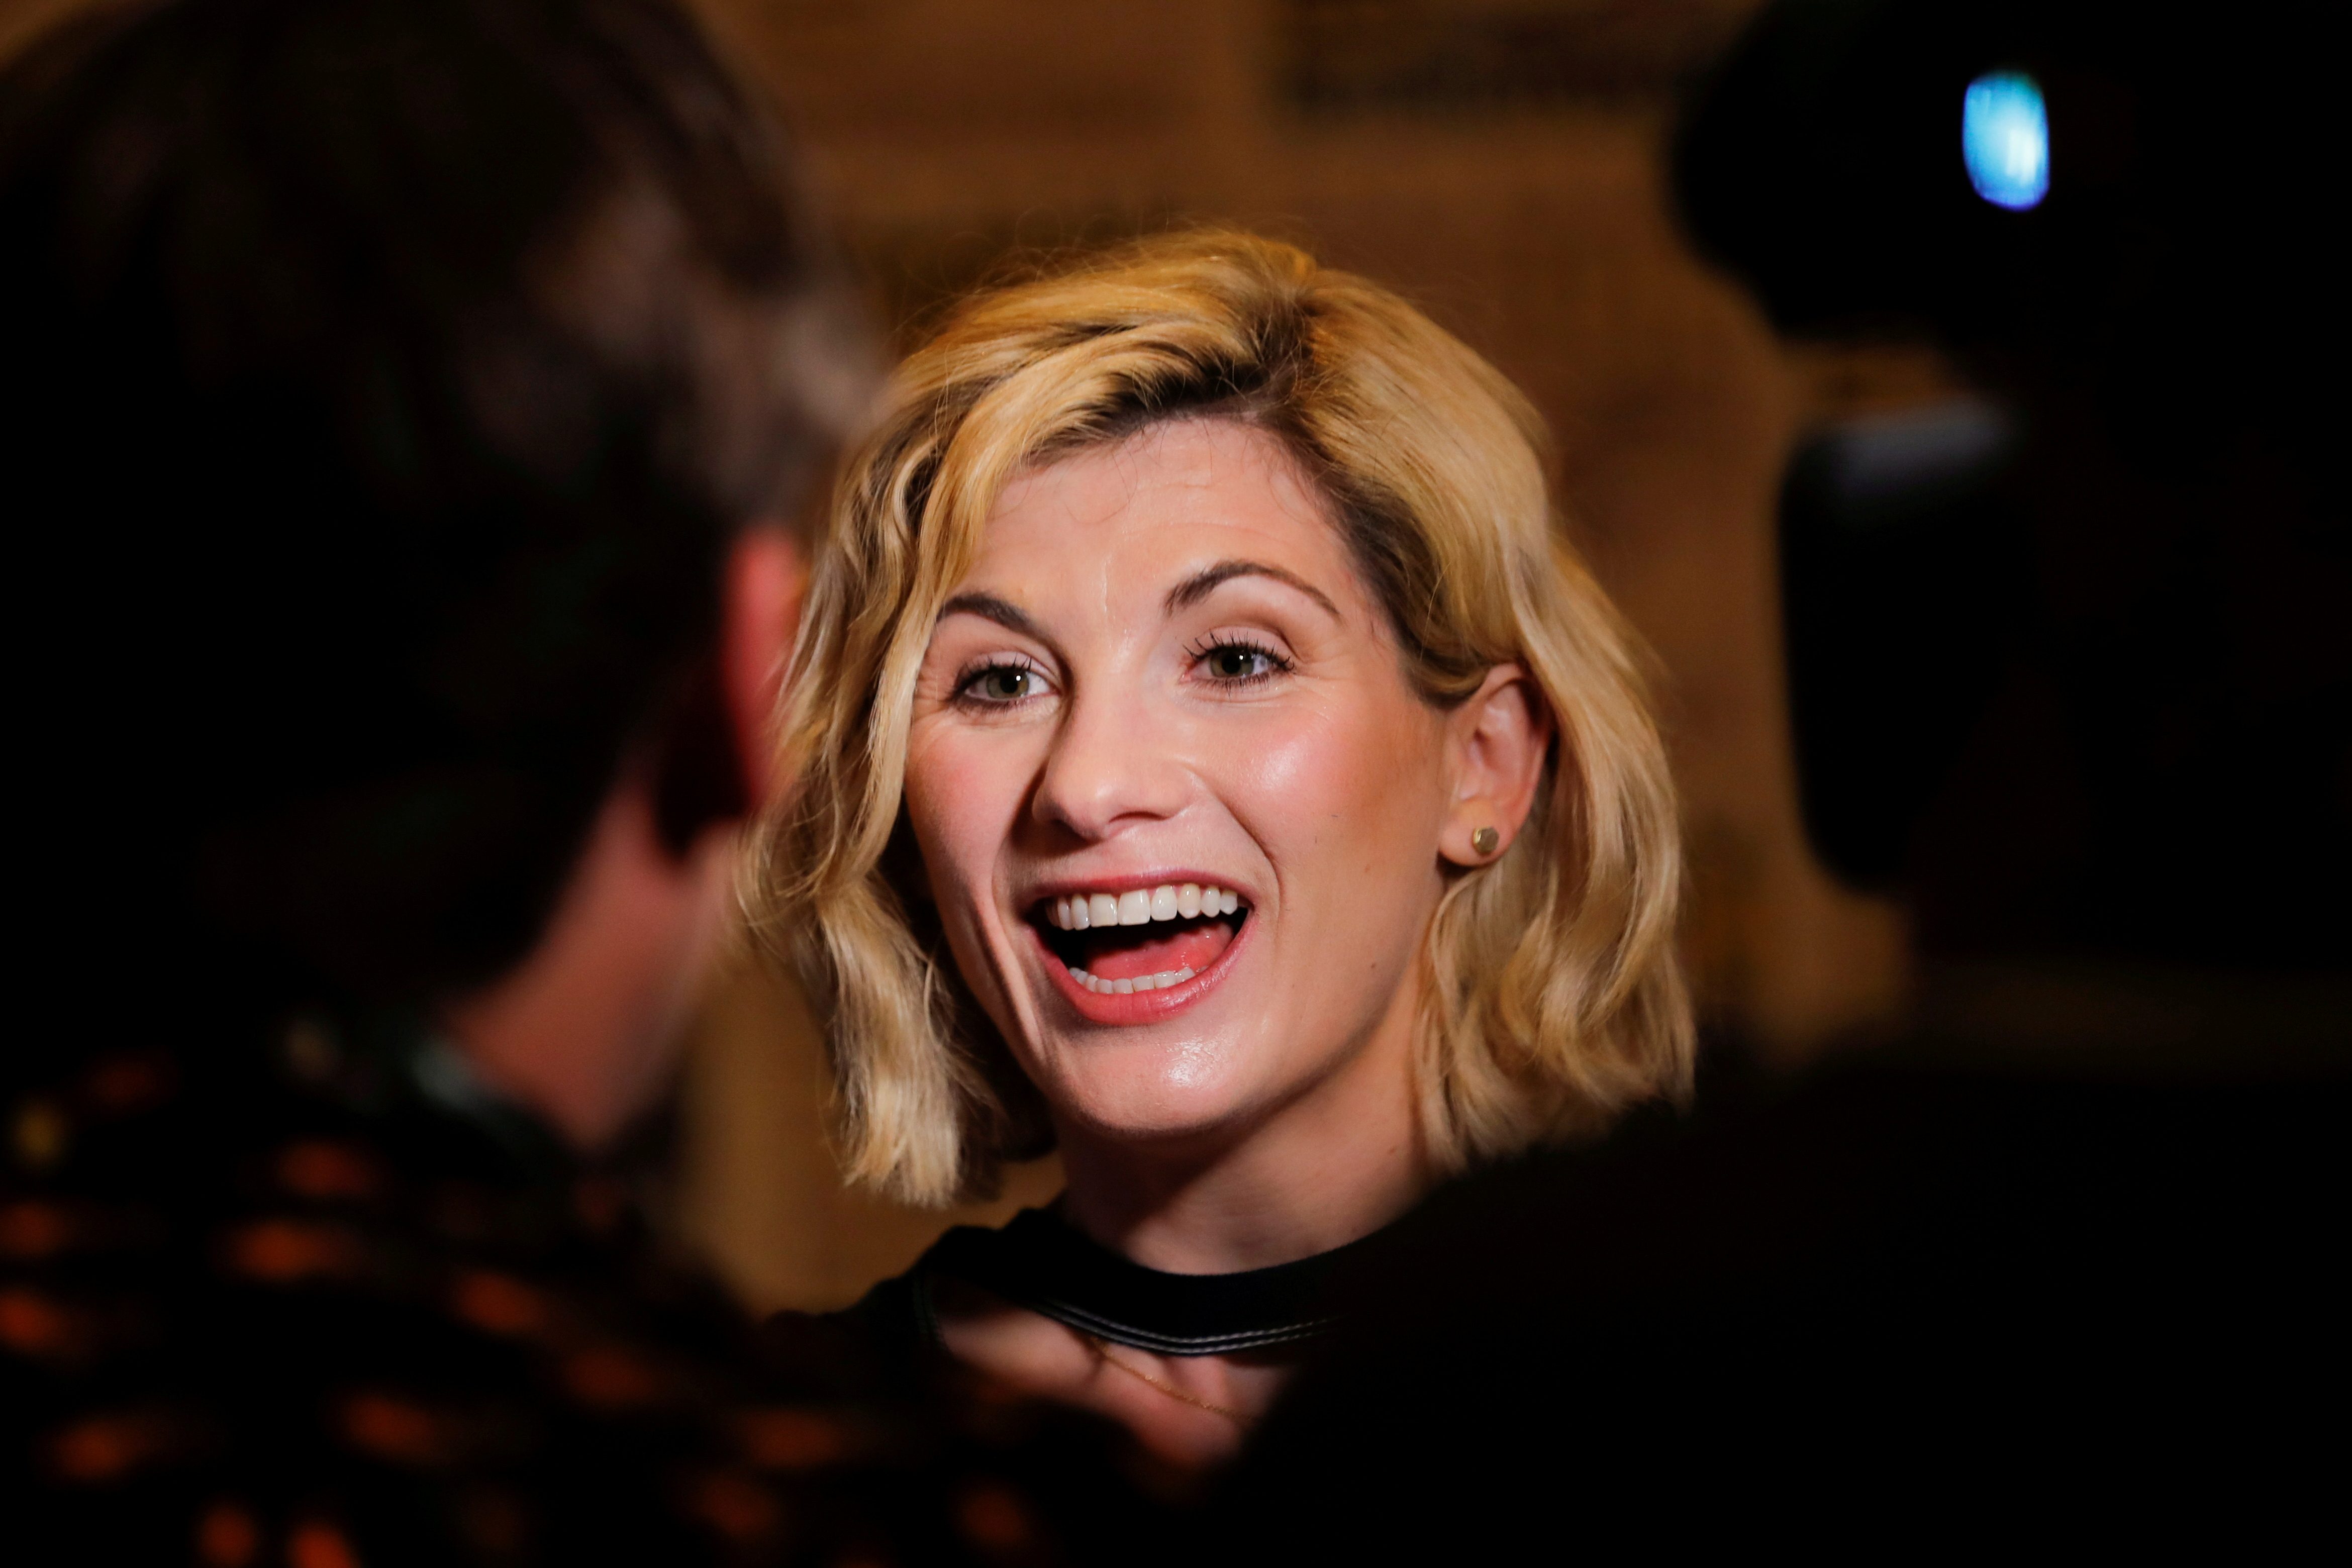 Jodie Whittaker to leave sci-fi series ‘Dr Who’ in 2022